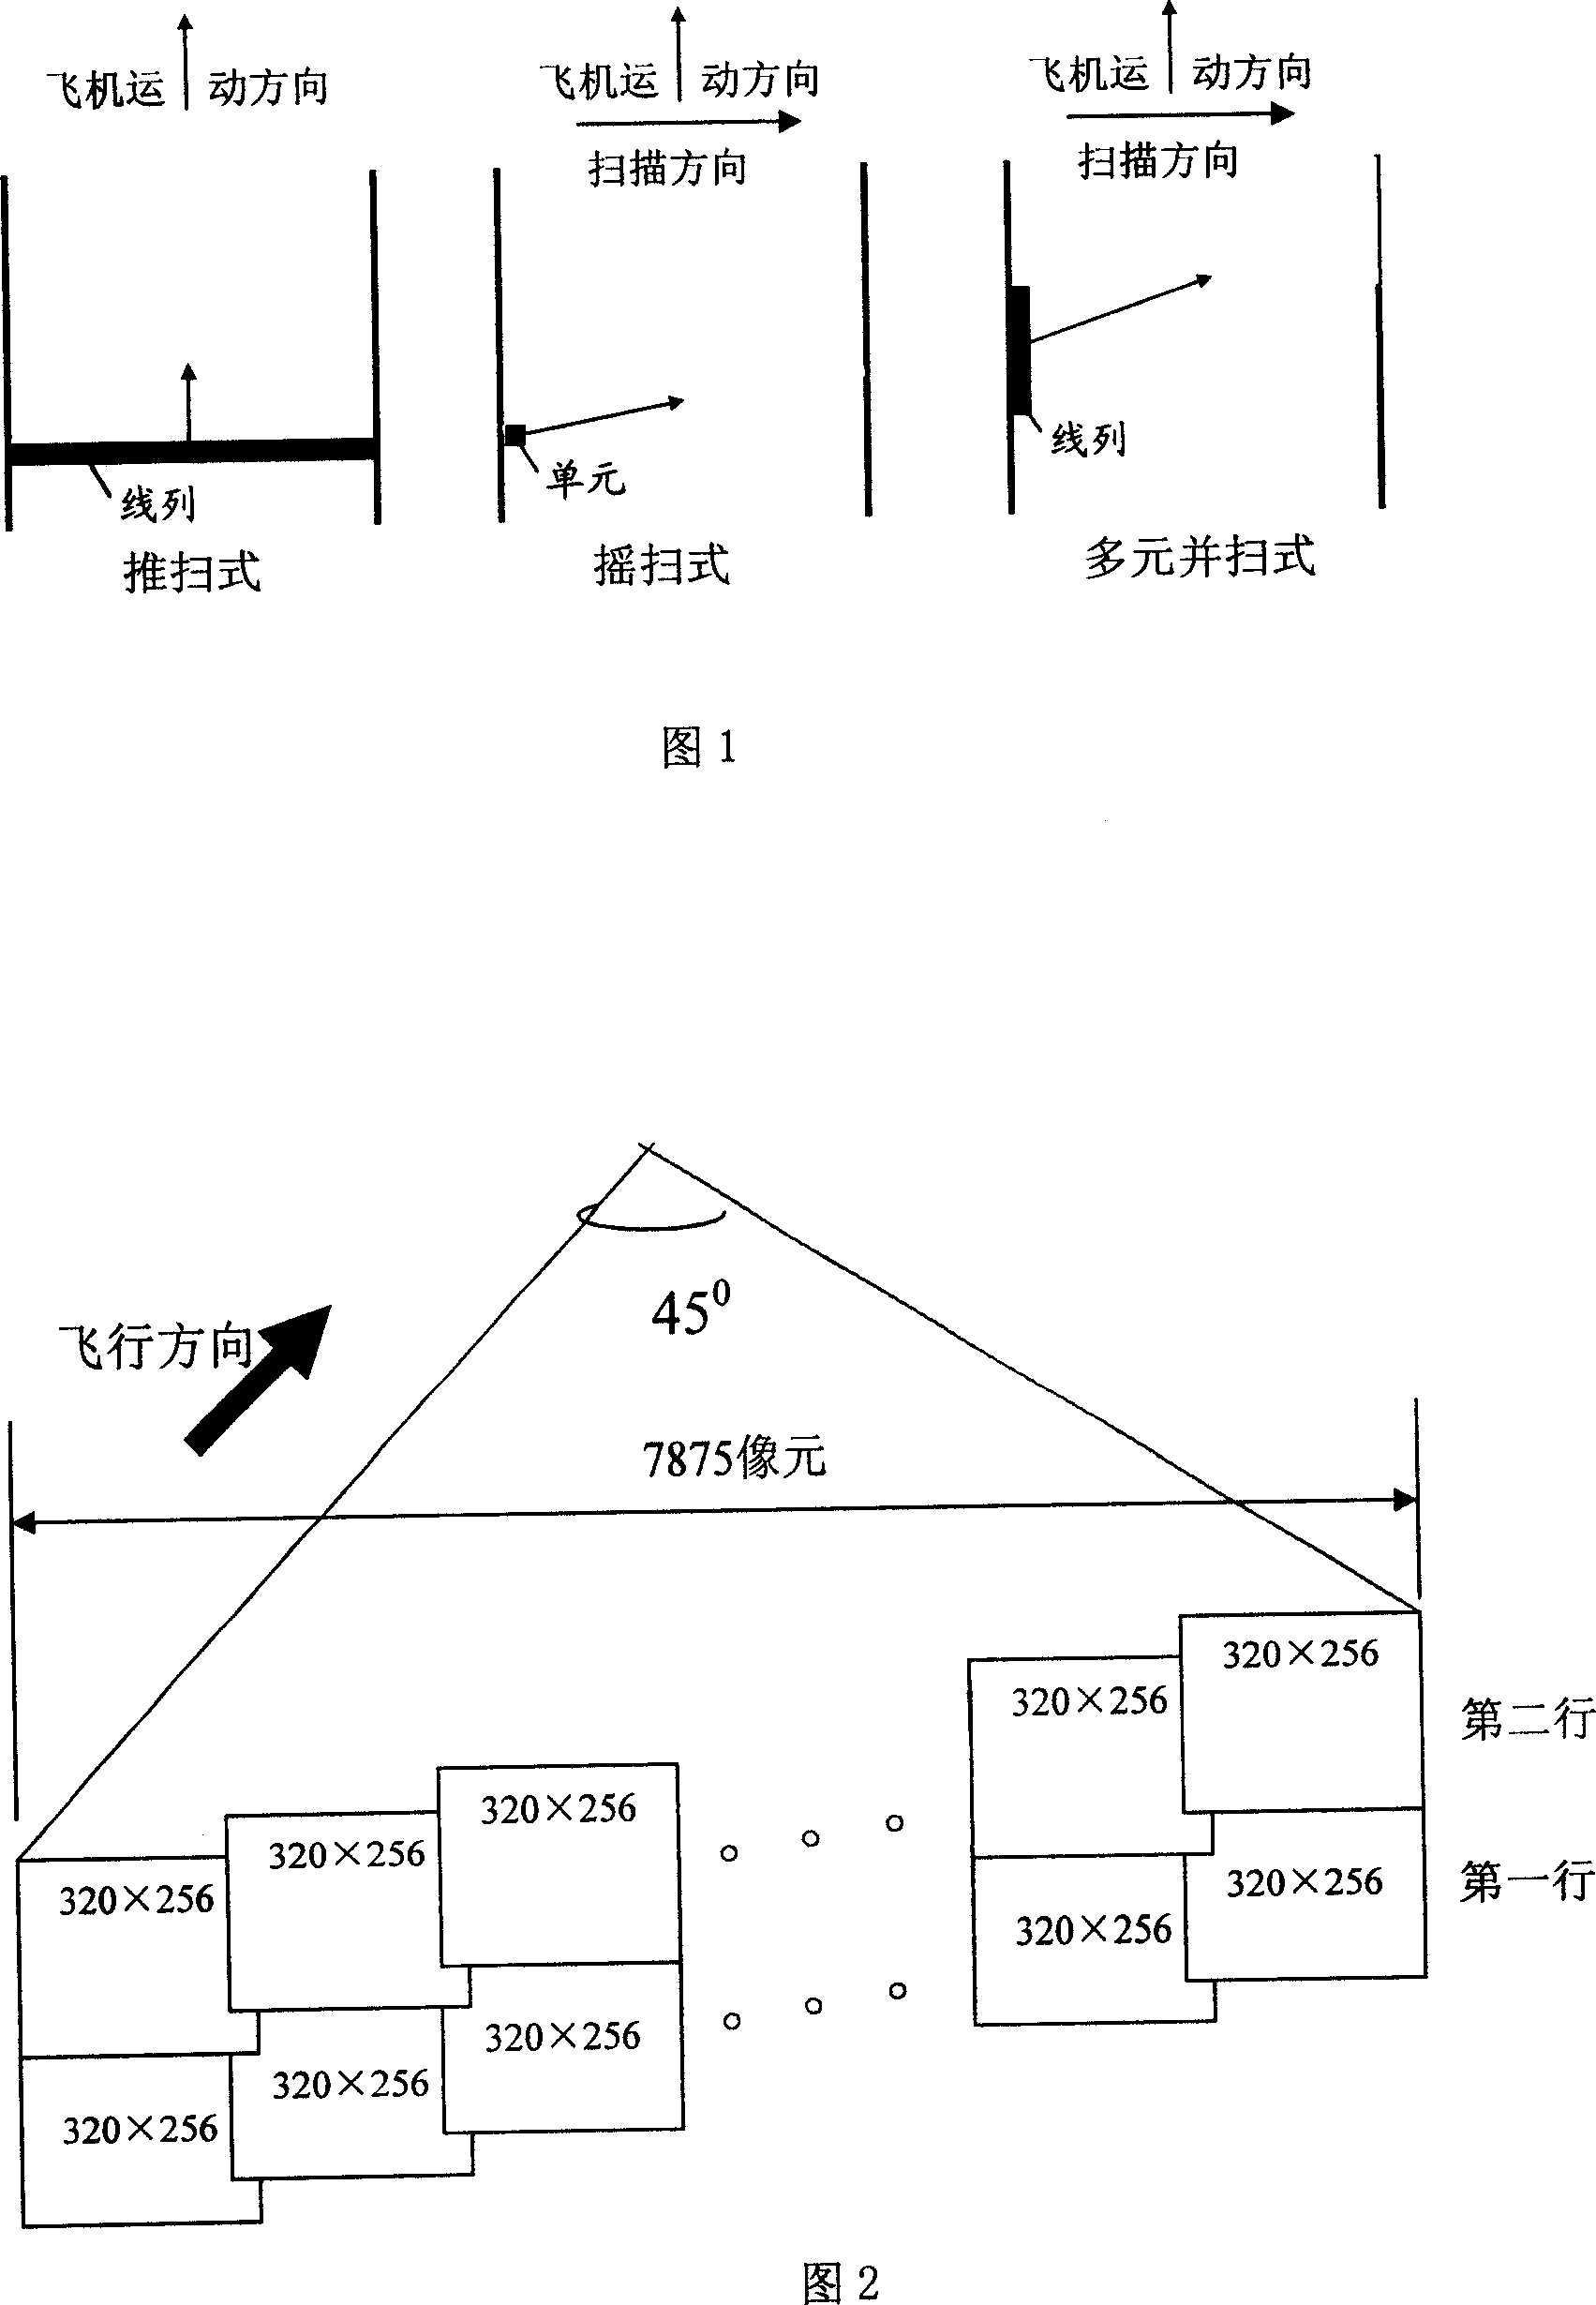 High-altitude infrared imaging method based on multi-element surface array splicing